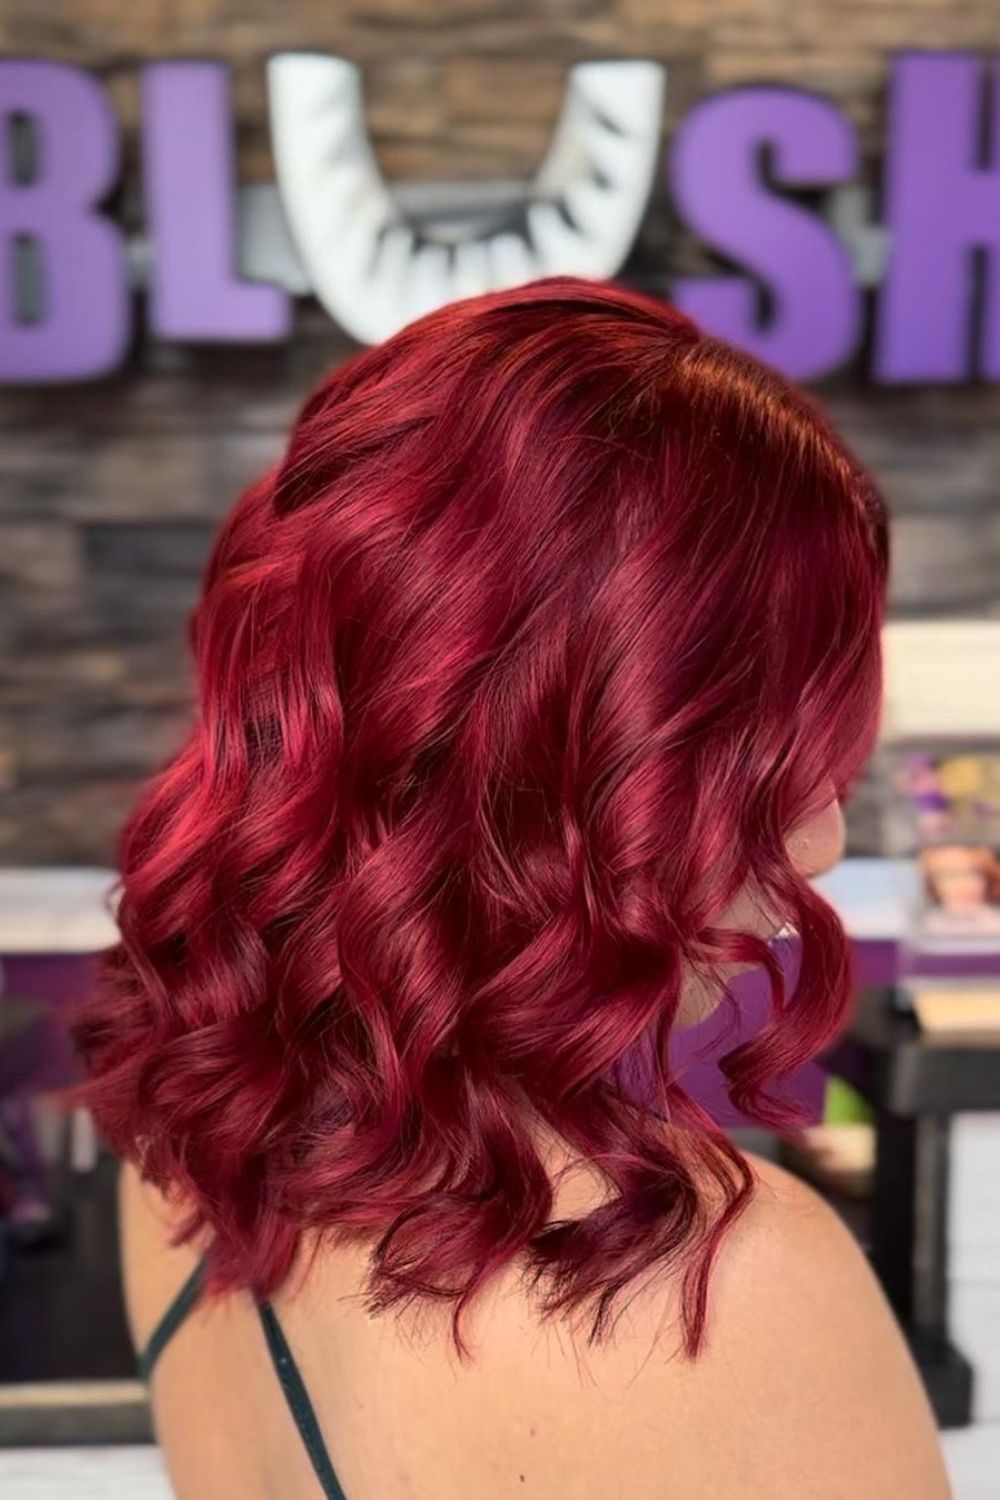 A woman with curled ruby red lob hair.